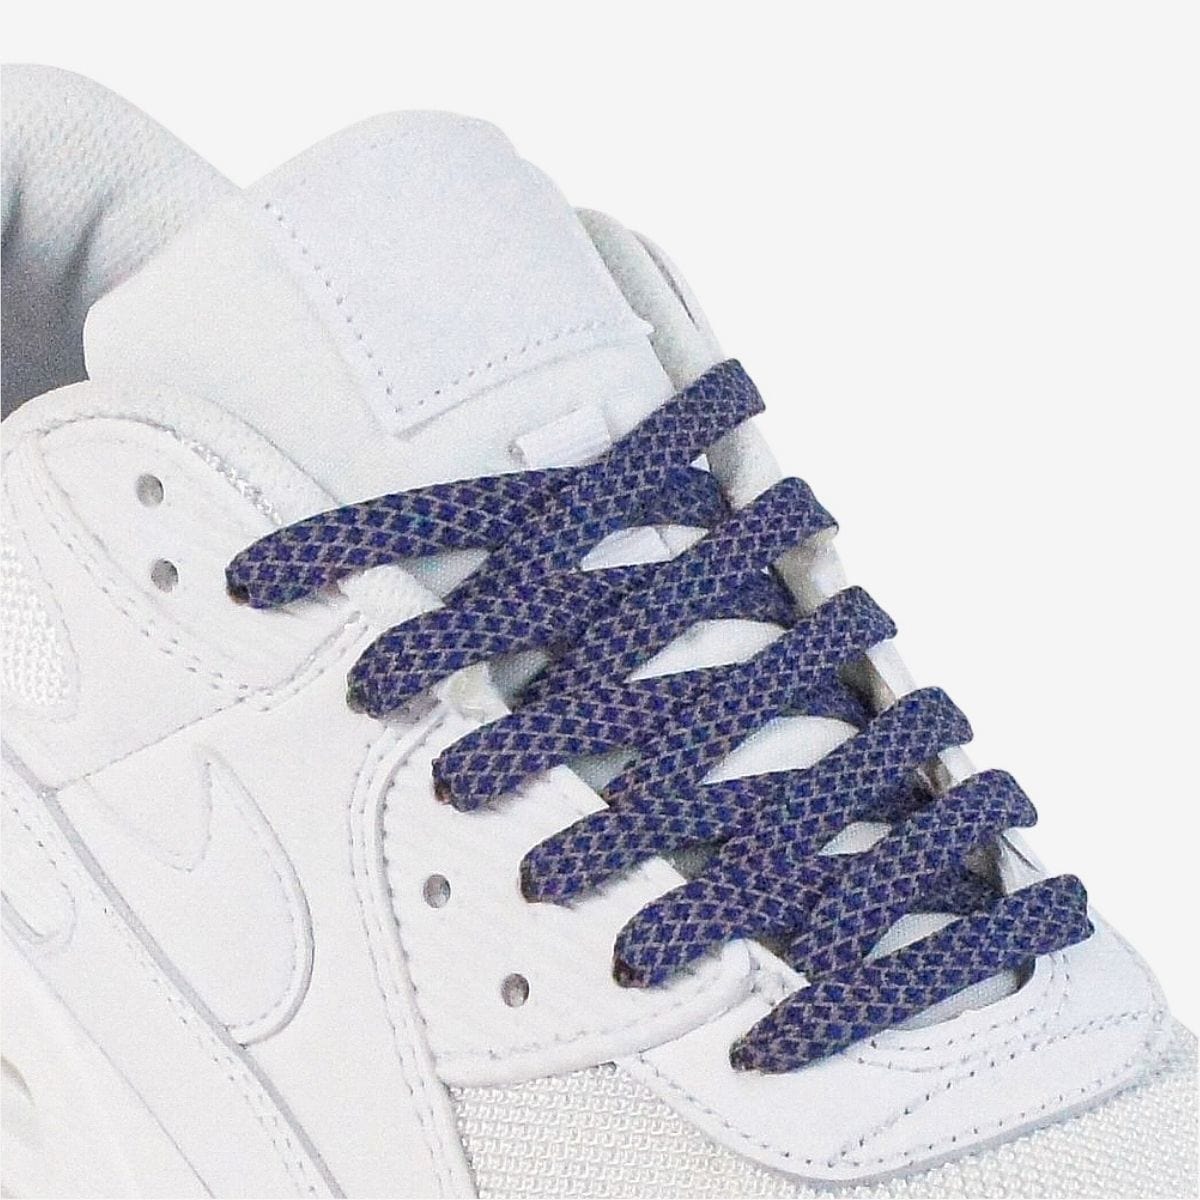 reflective-flat-shoelaces-in-dark-blue-suitable-for-popular-sneakers